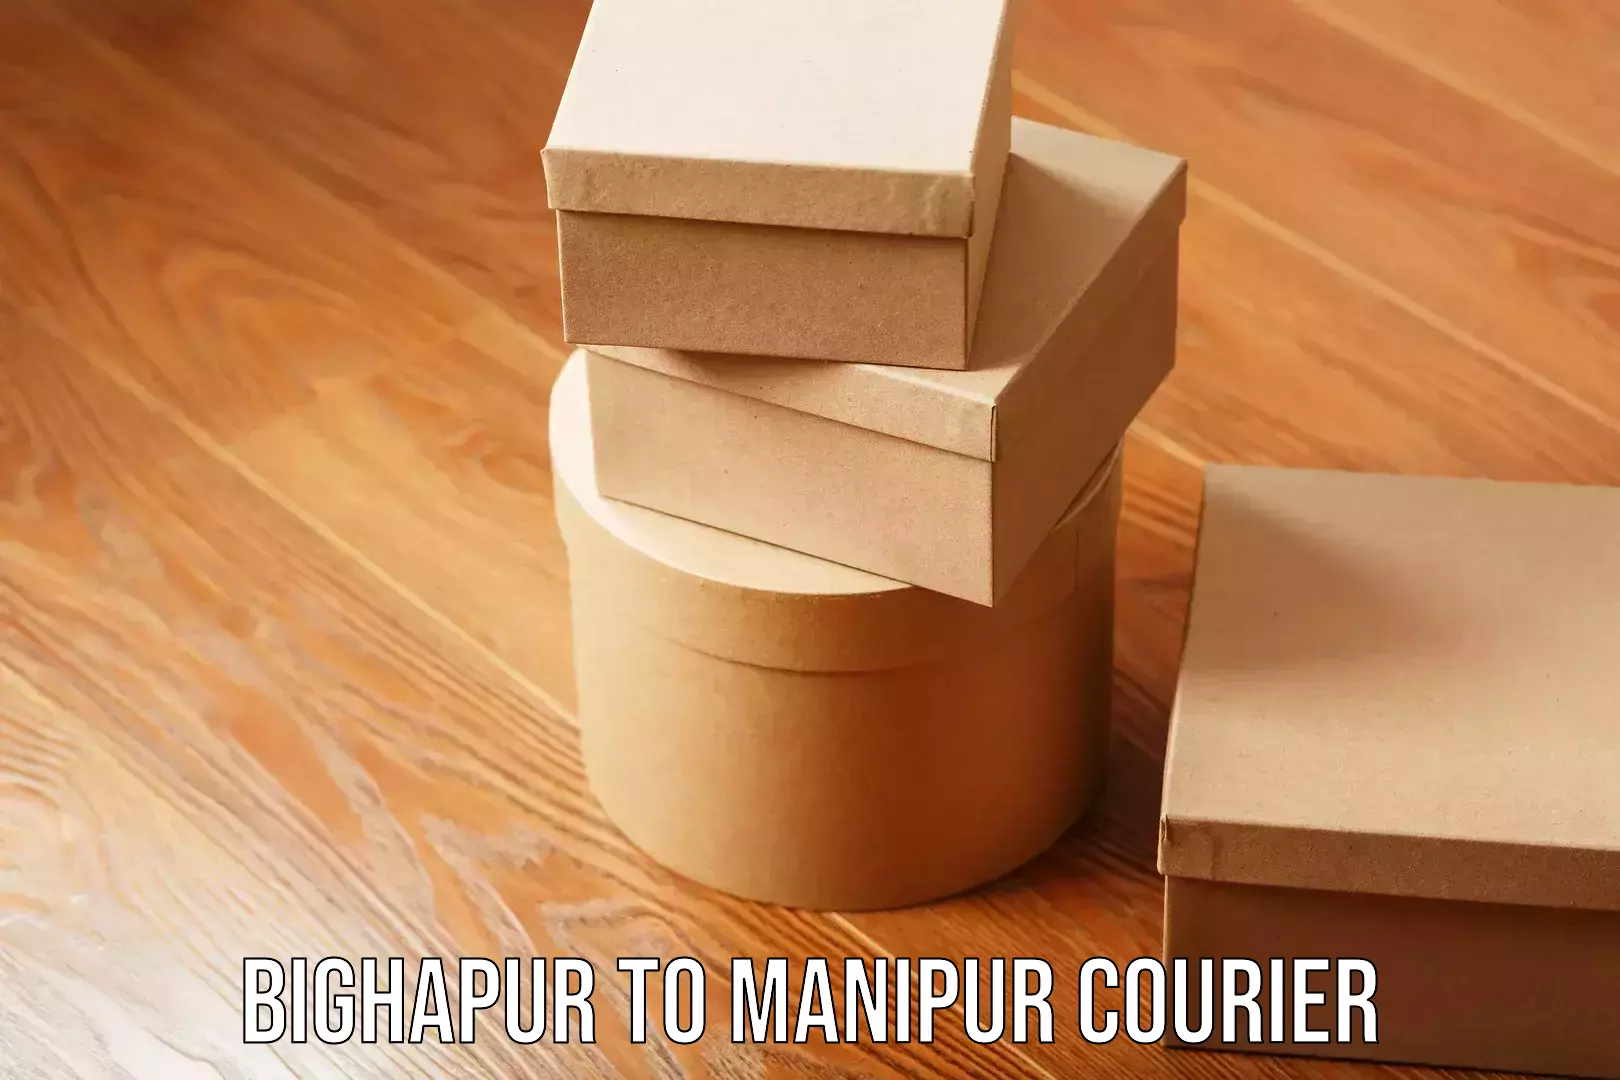 24-hour courier service in Bighapur to Manipur